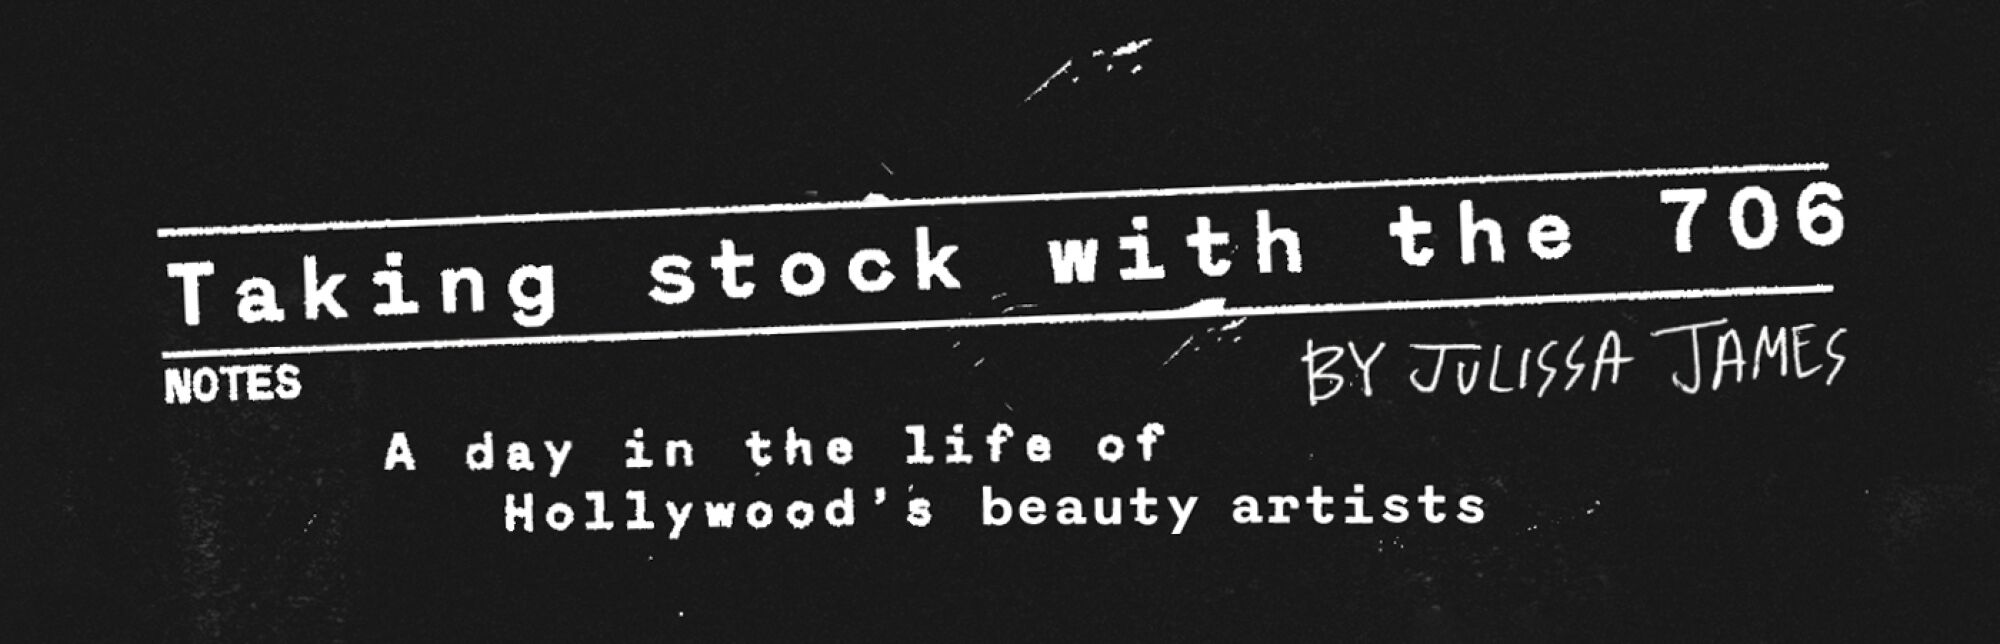 Taking Stock with the 706: A day in the life of Hollywood’s beauty artists by Julissa James